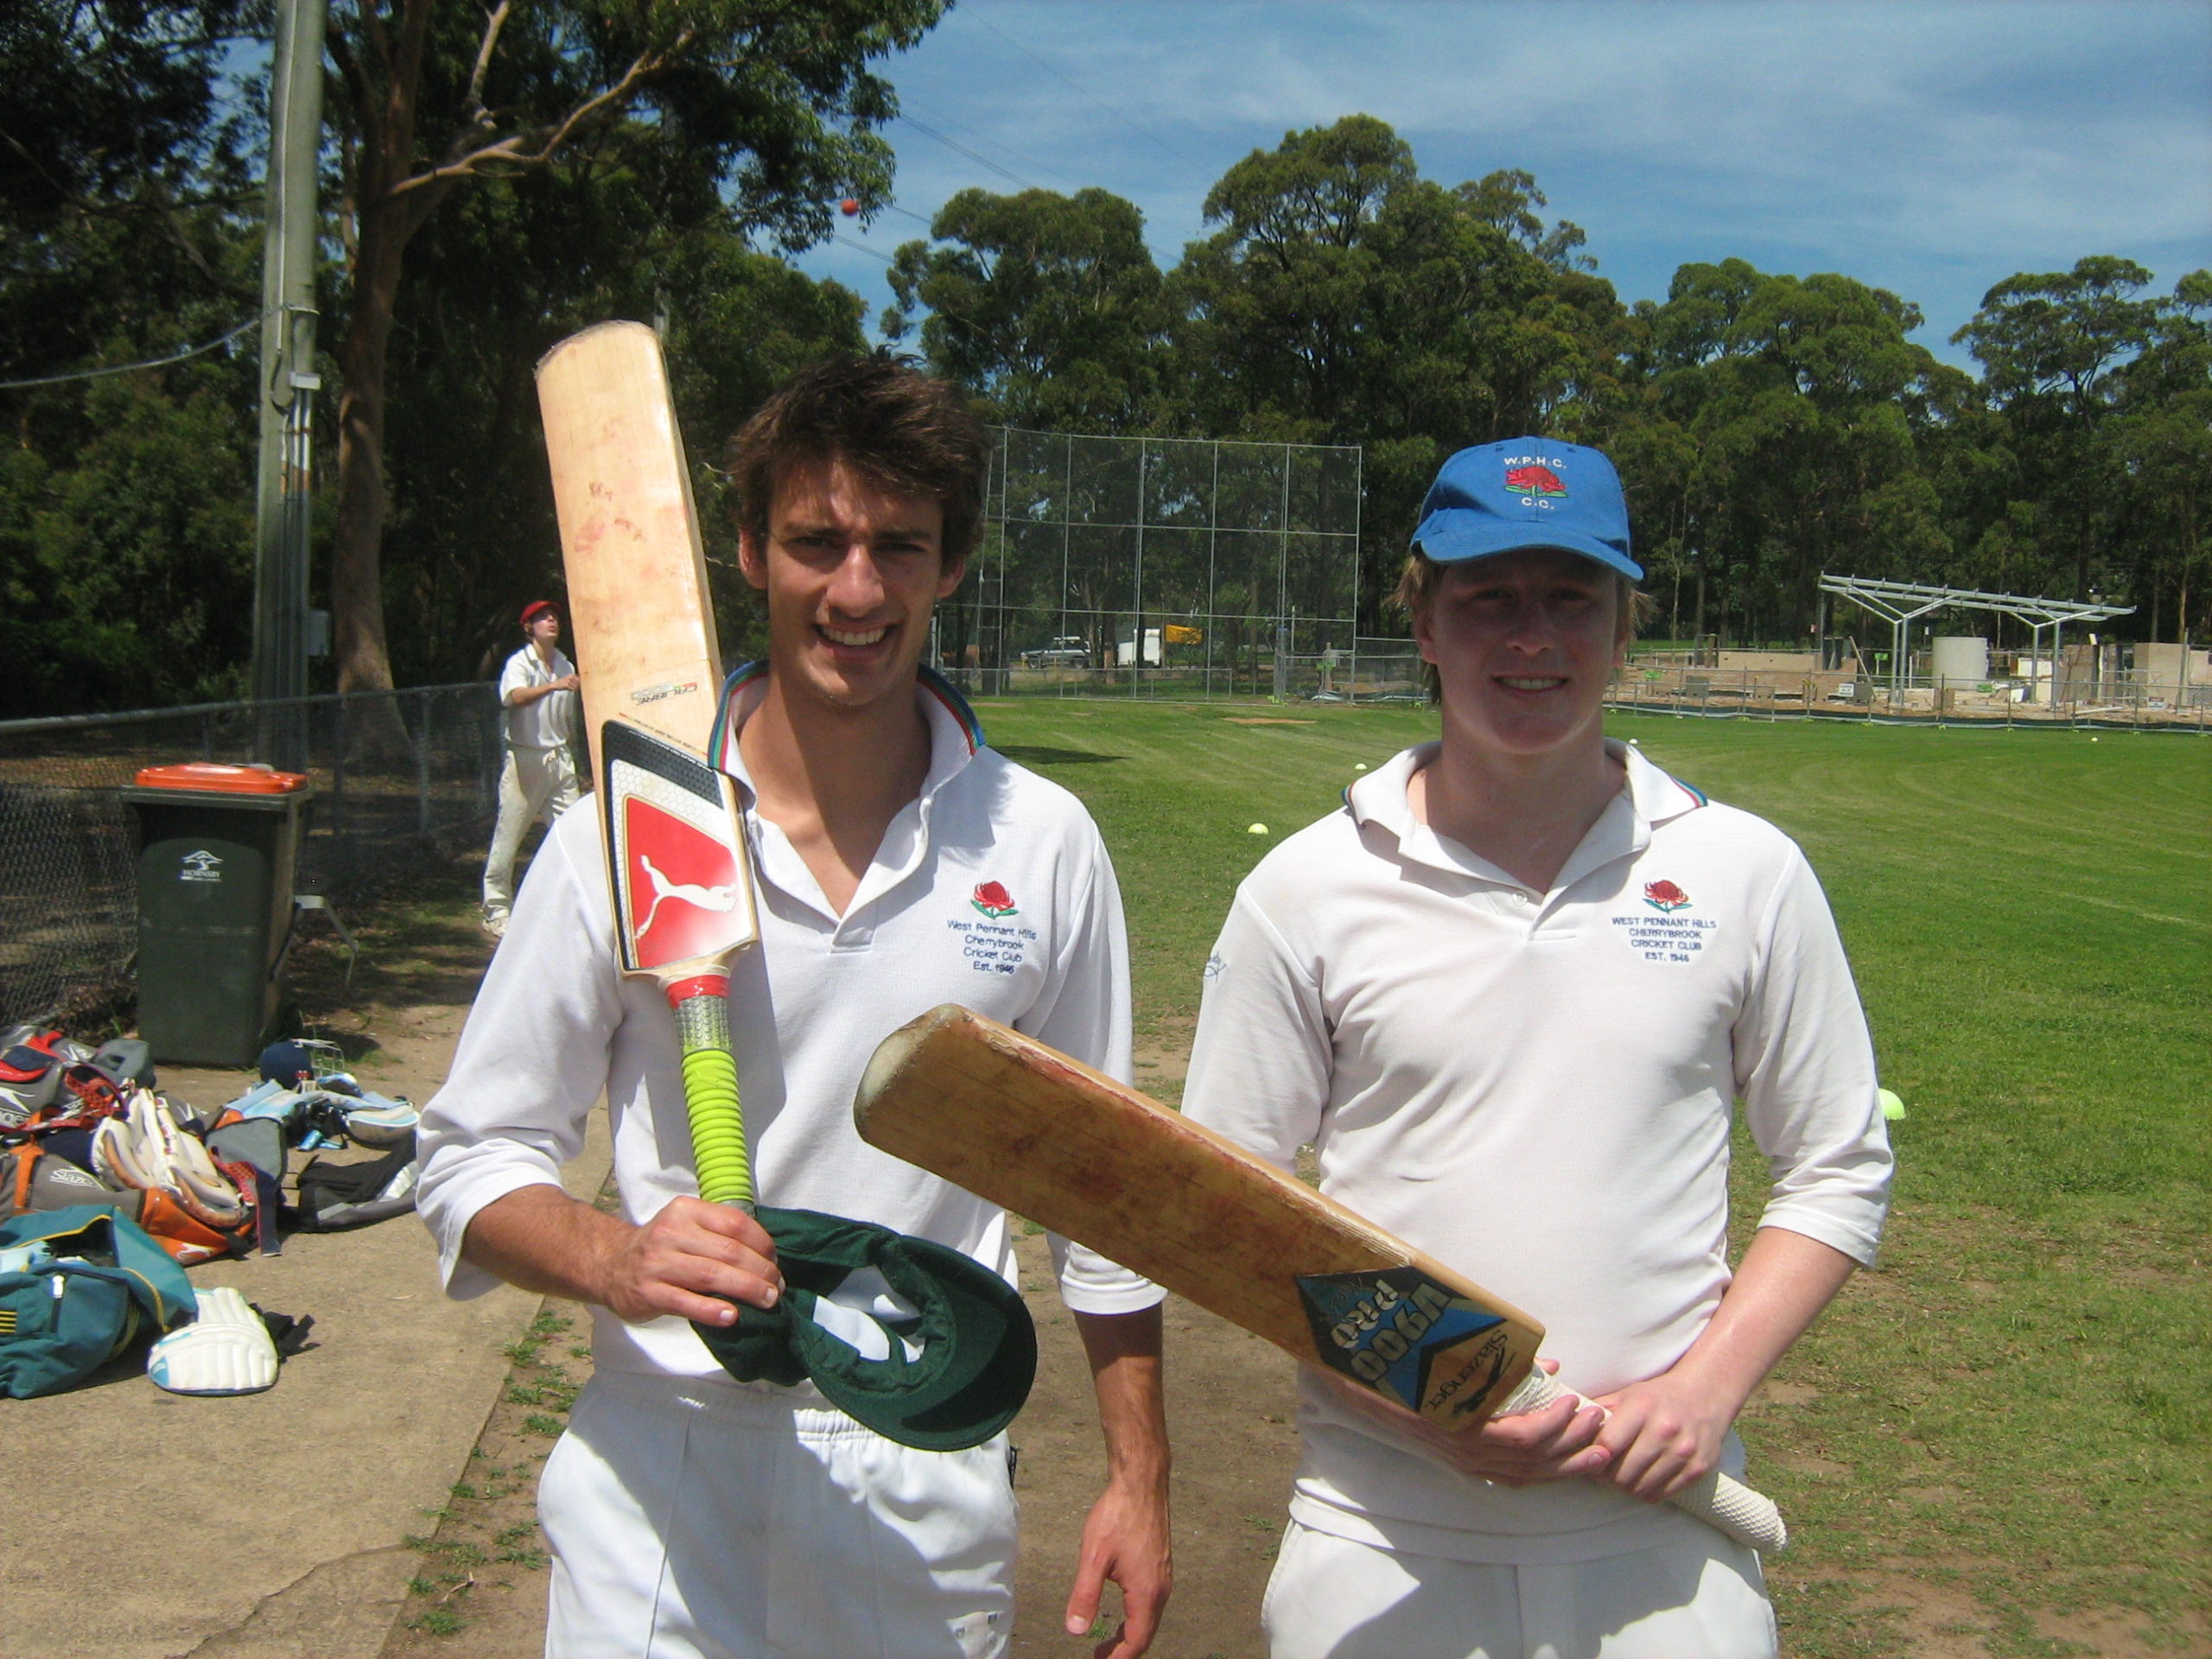 C1 4th wicket record of 259 runs - Nathan Tripolone 183 & Sam Kleinhans 90 (Hornsby @ Glenhaven) 22102011